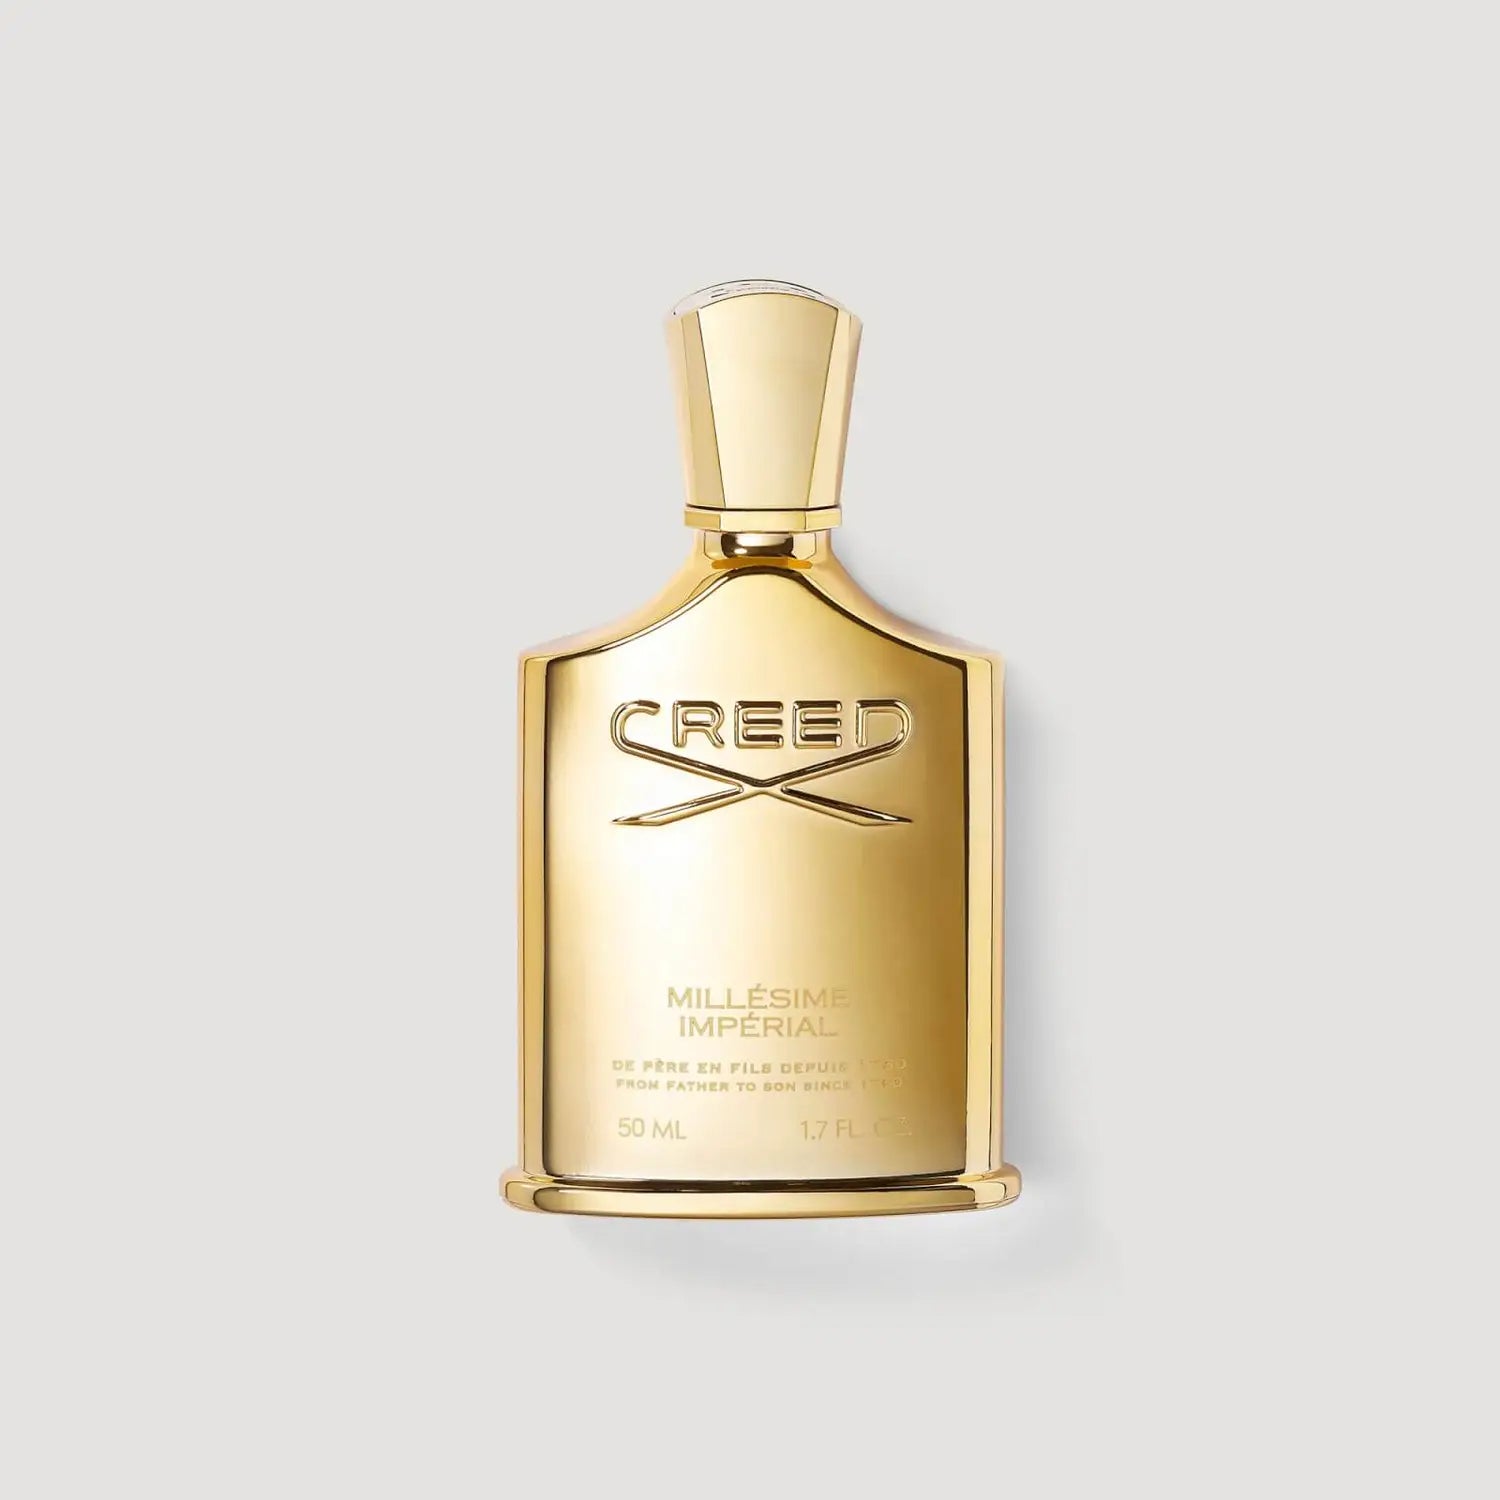 CREED - Millesime Imperial - 50ML